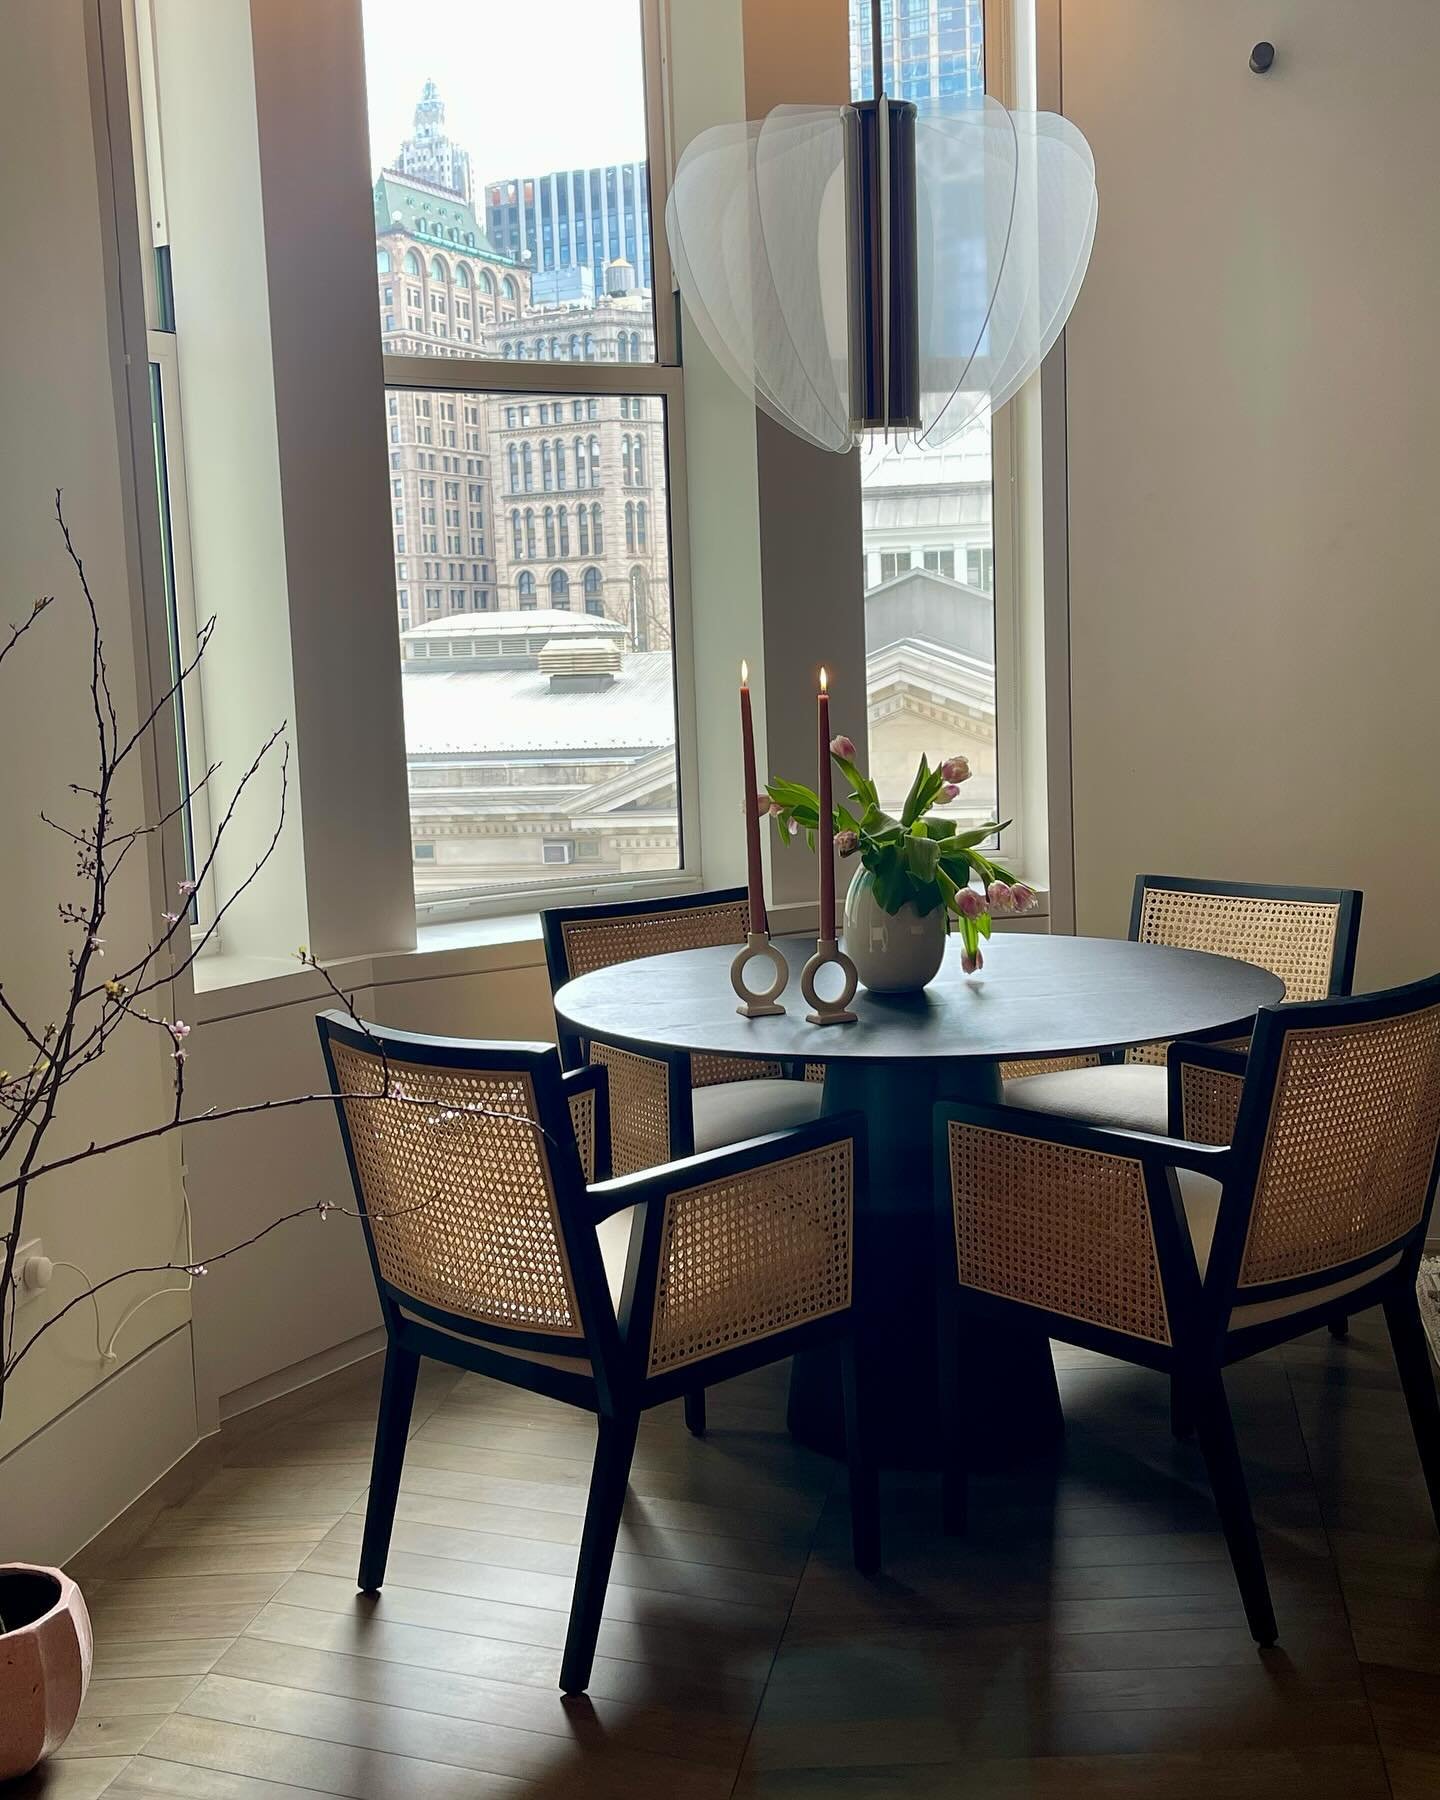 New York we 🤍 you. And this dining nook with a view&hellip;. #ModernMinimalism #ChicDesign #SleekStyle #InteriorInspiration #DesignGoals #MinimalistLiving #nycinteriorstyle